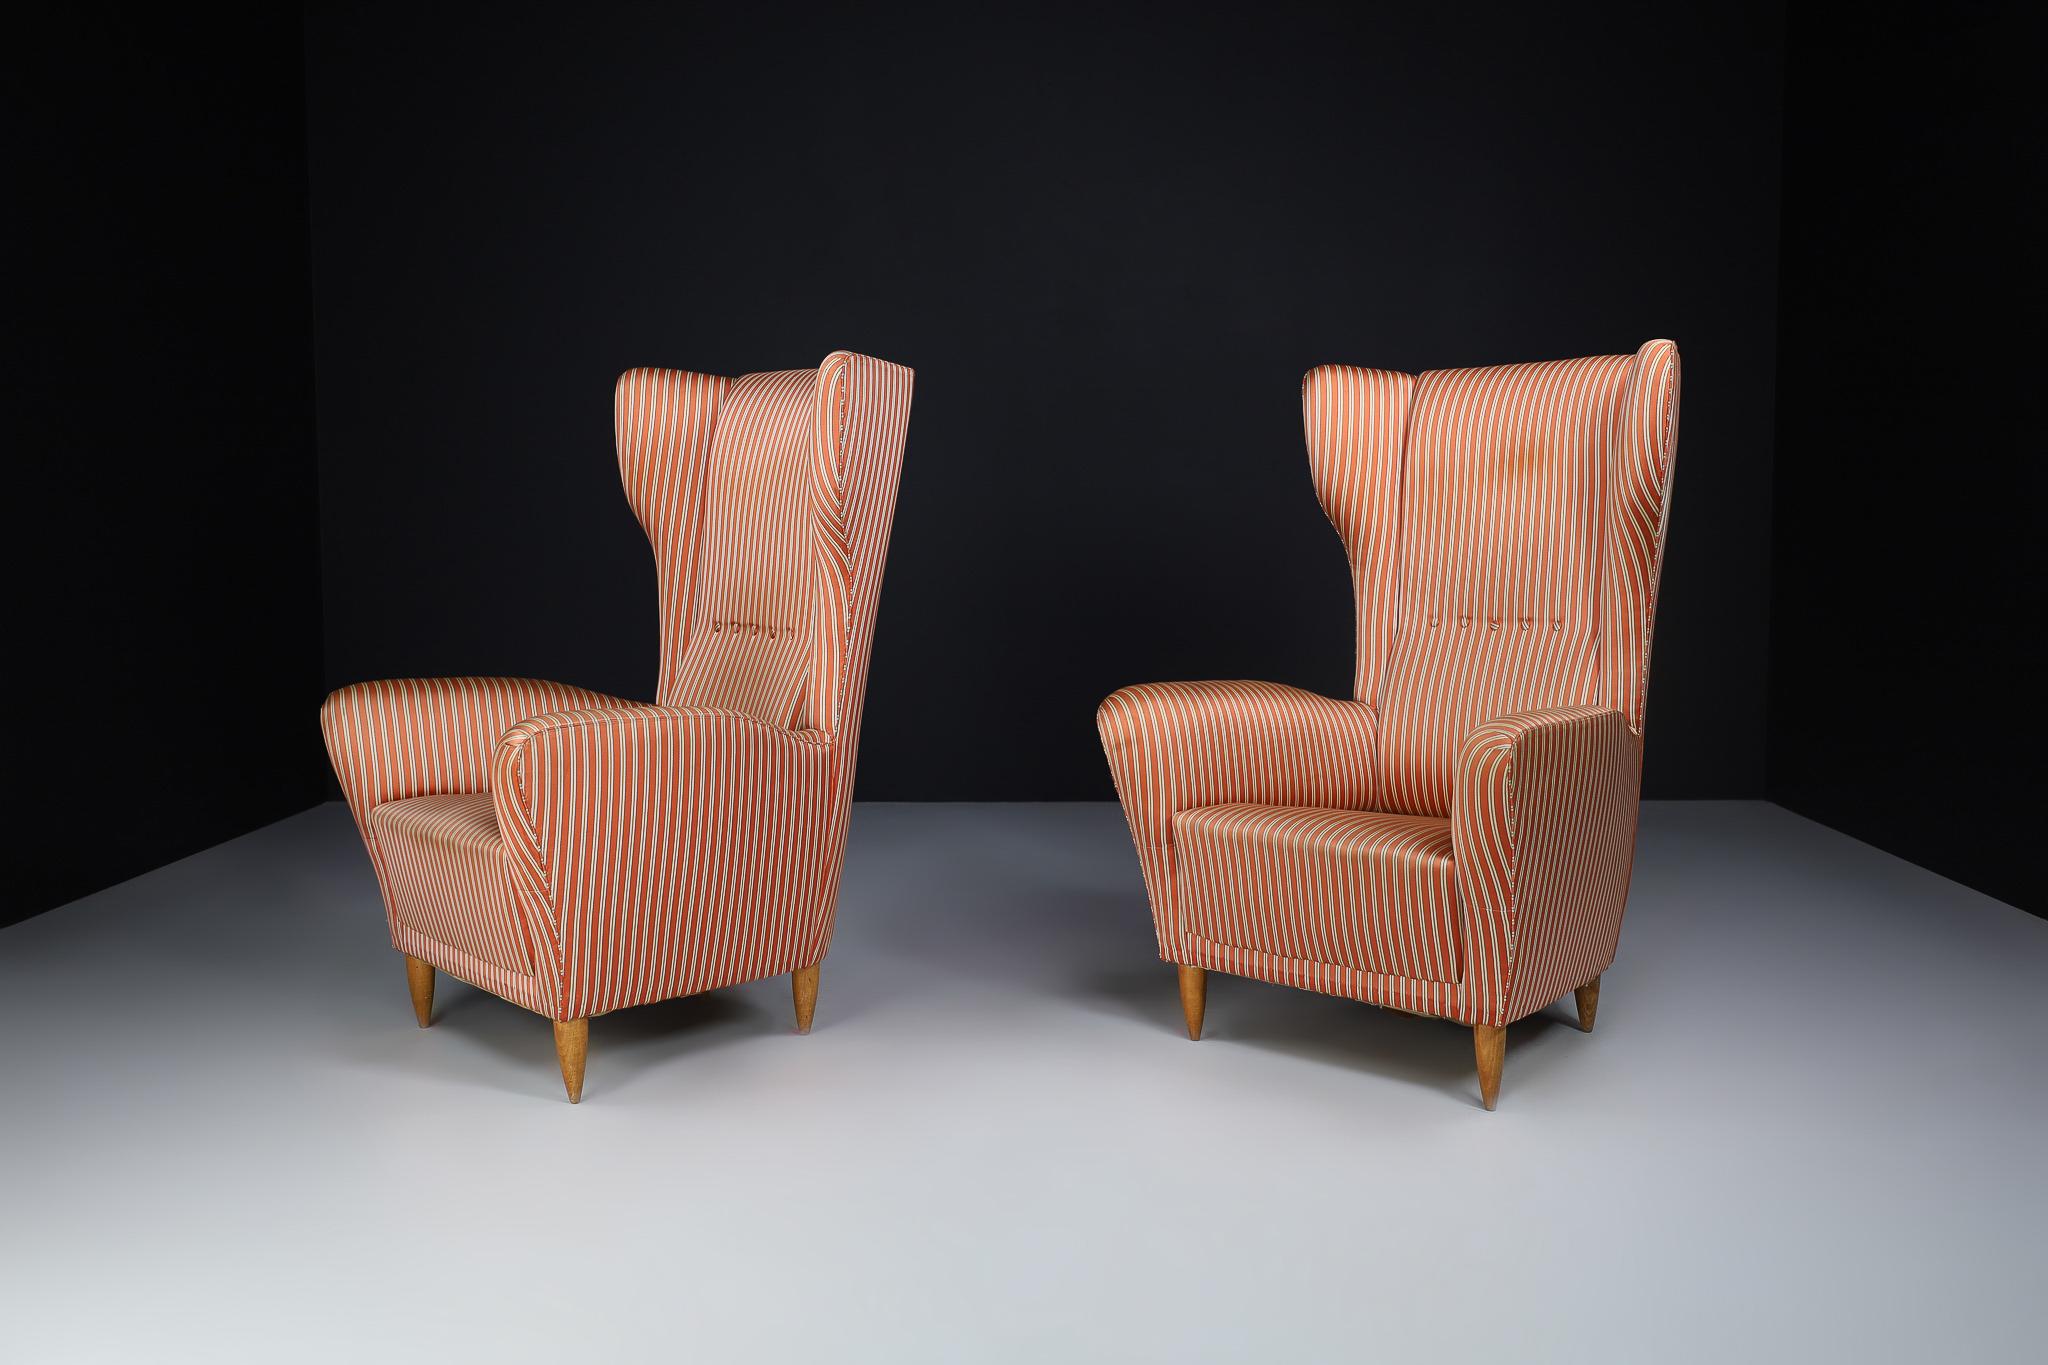 Italian Pair of Two High Back Lounge Chairs in Original Fabric, Italy 1940s For Sale